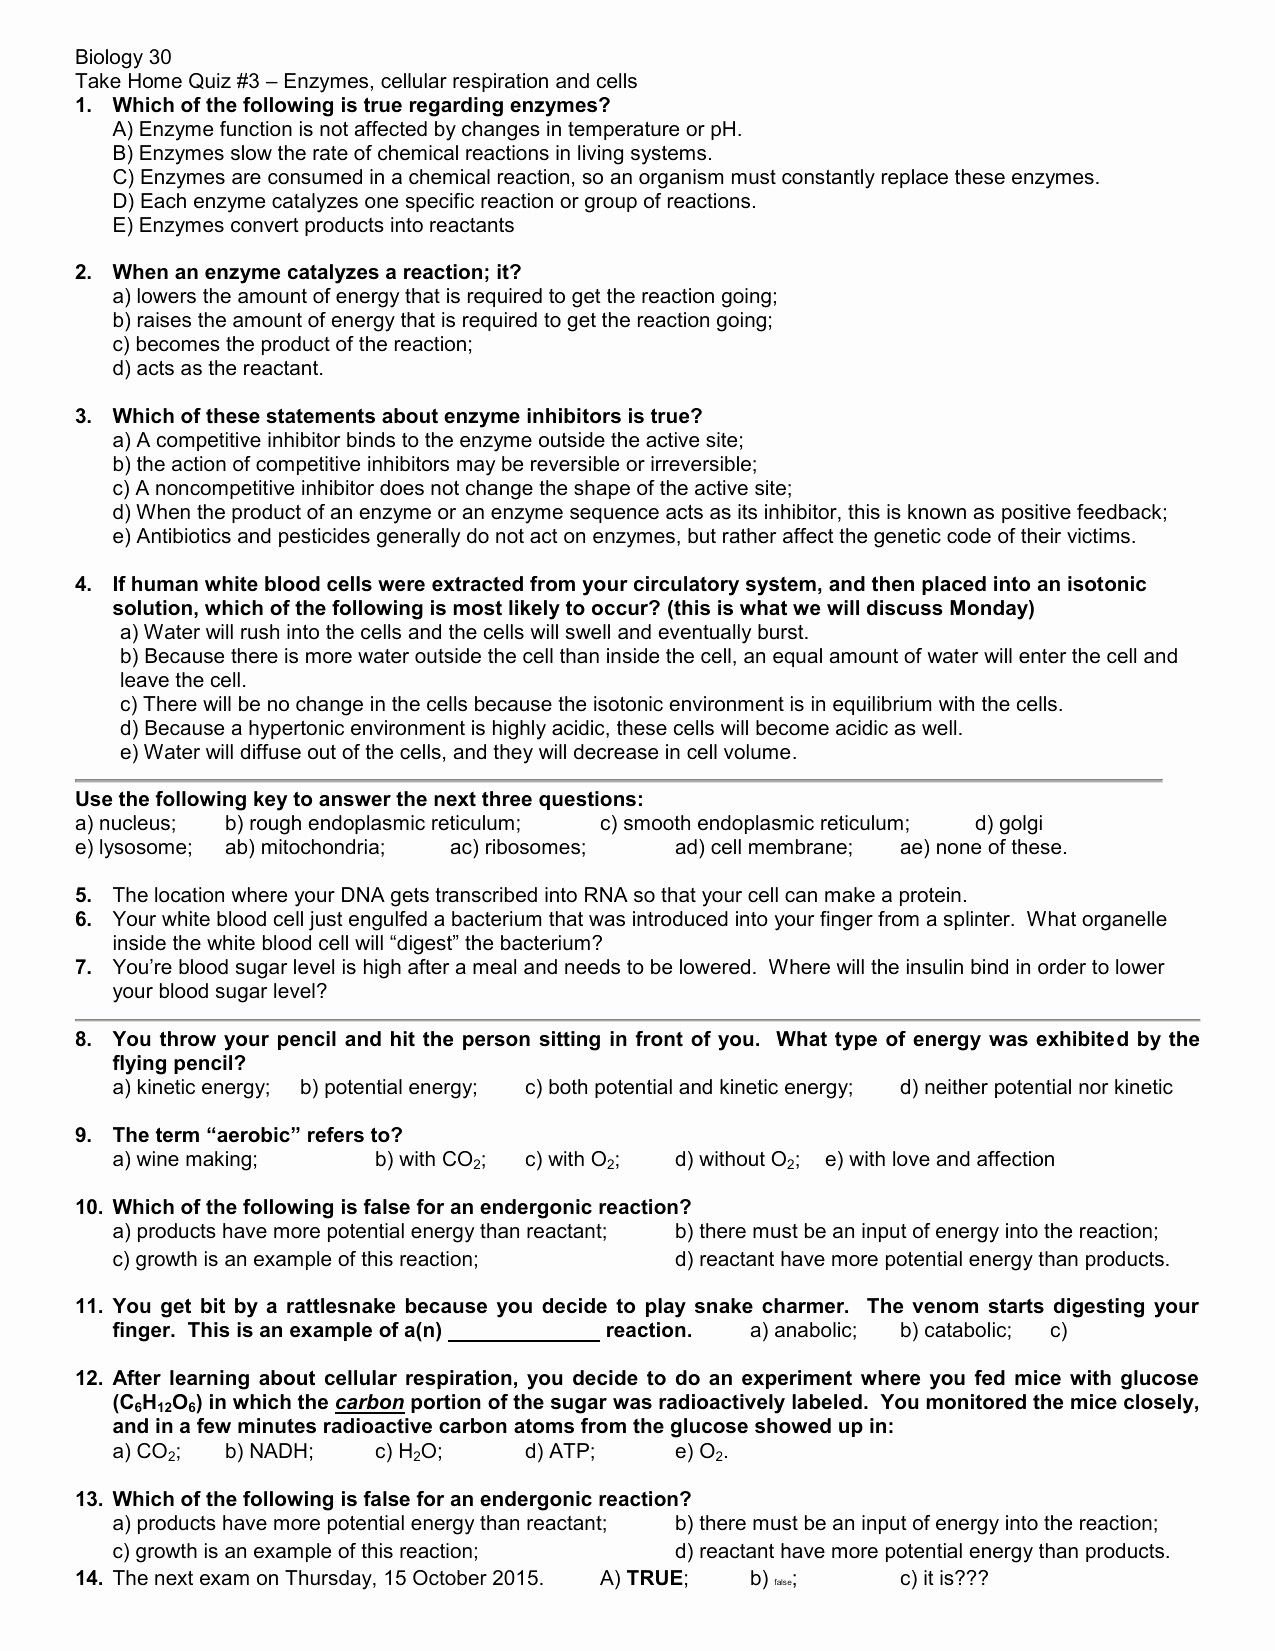 Milliken Publishing Company Worksheet Answers Mp4057  Briefencounters Throughout Milliken Publishing Company Worksheet Answers Mp4057